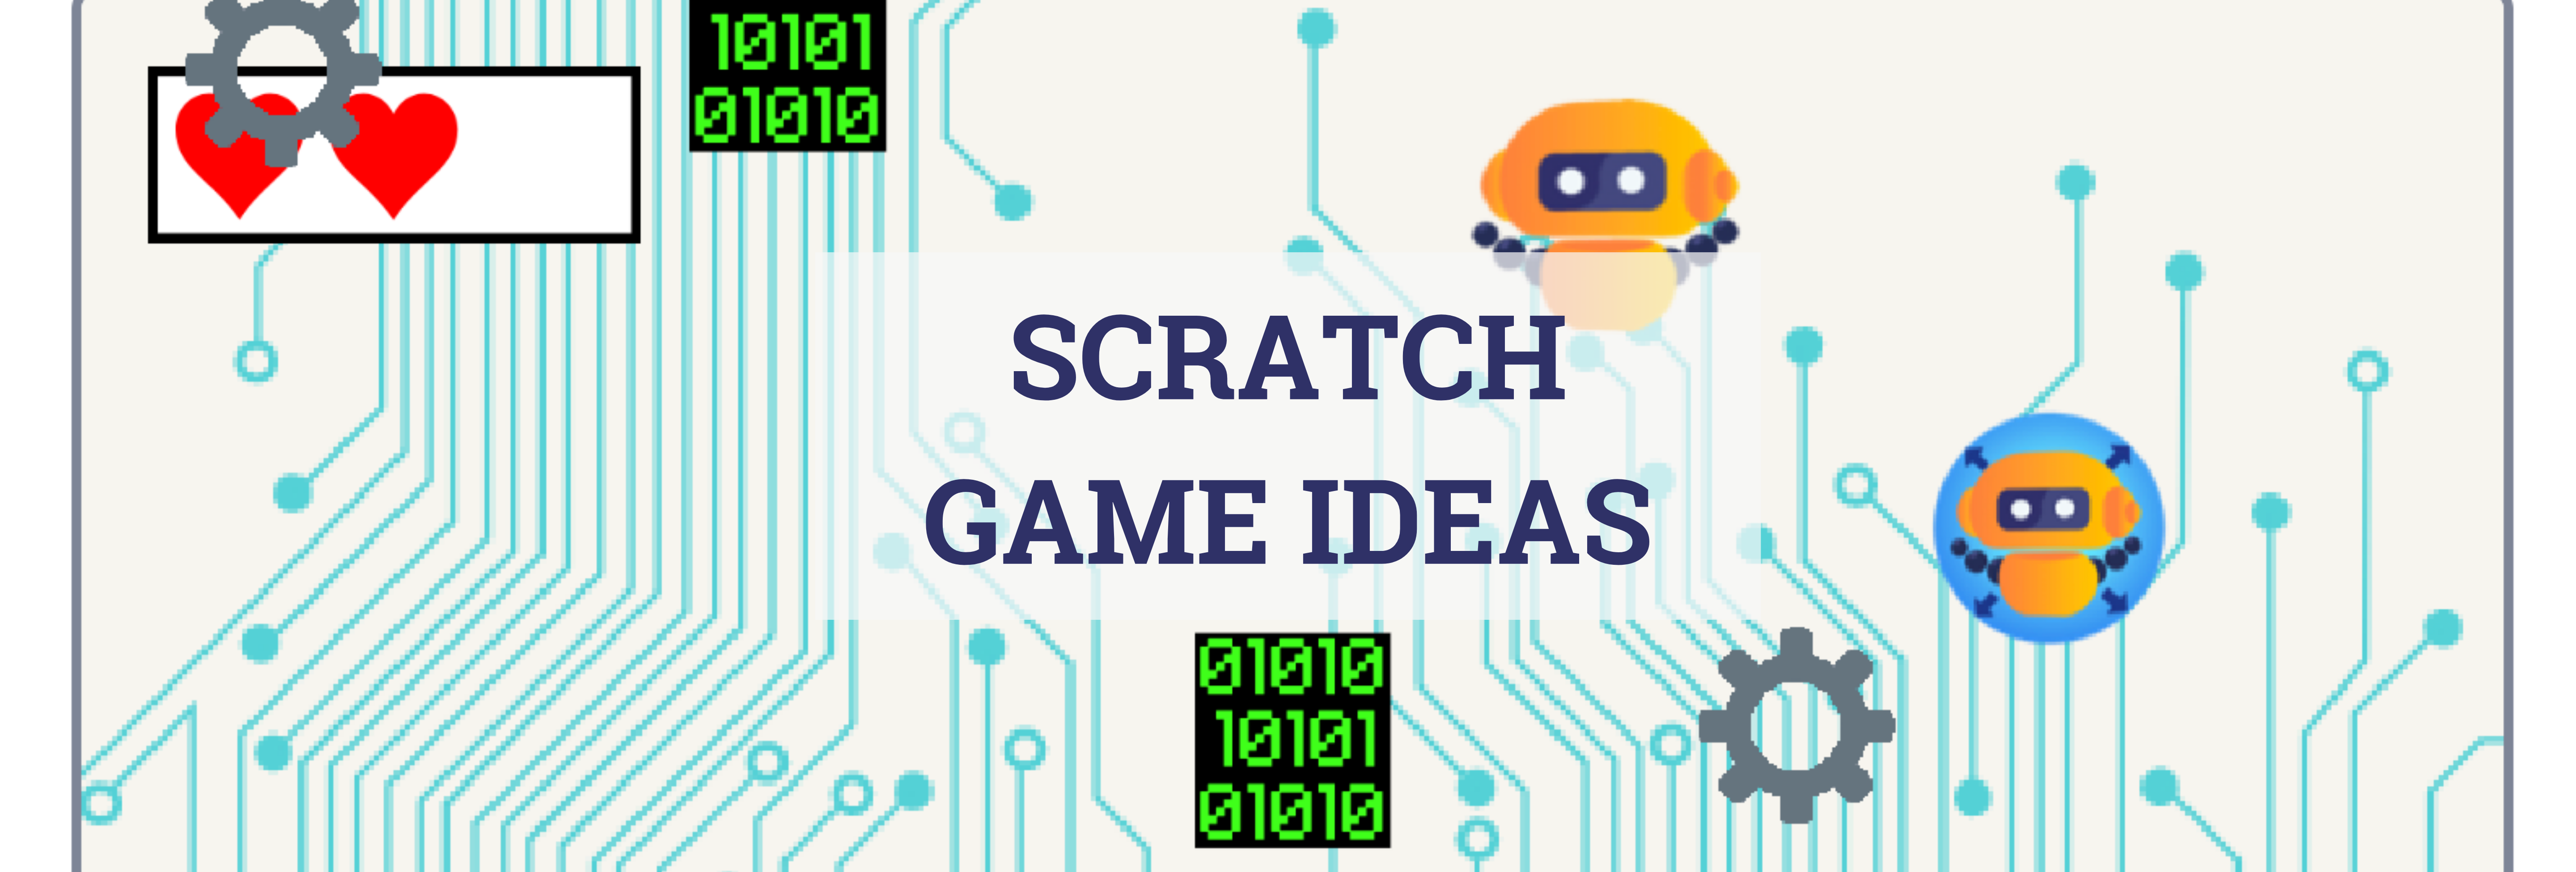 How to make Flappy Bird on Scratch  Coding For Kids » Scratch 3.0 Game  Tutorial